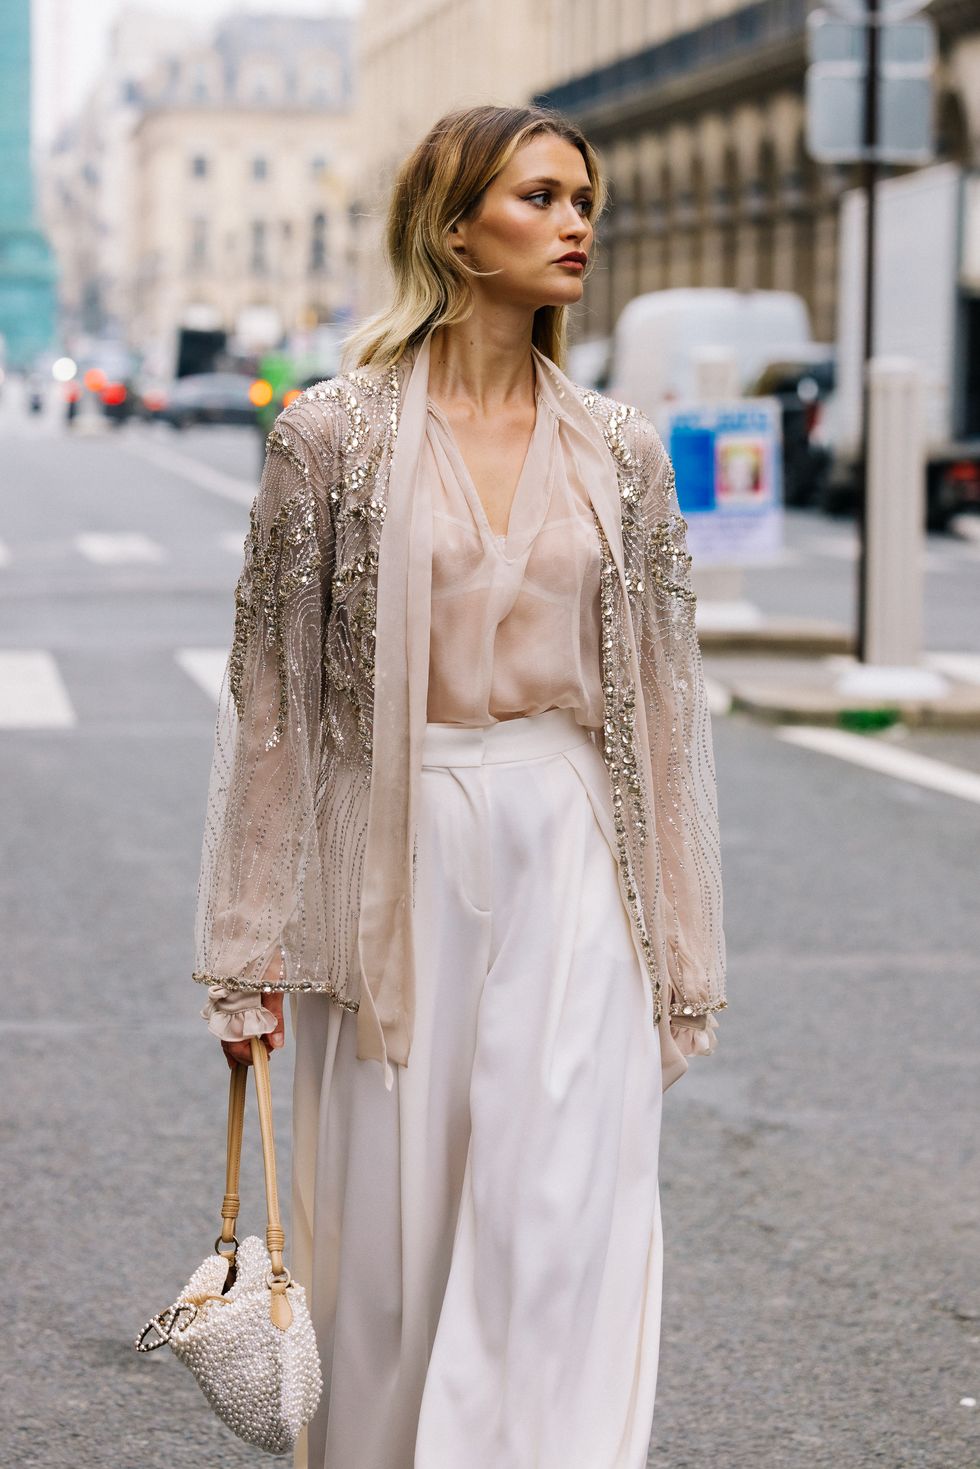 Spring 2019 Couture Week: Street Style at the Chanel Show